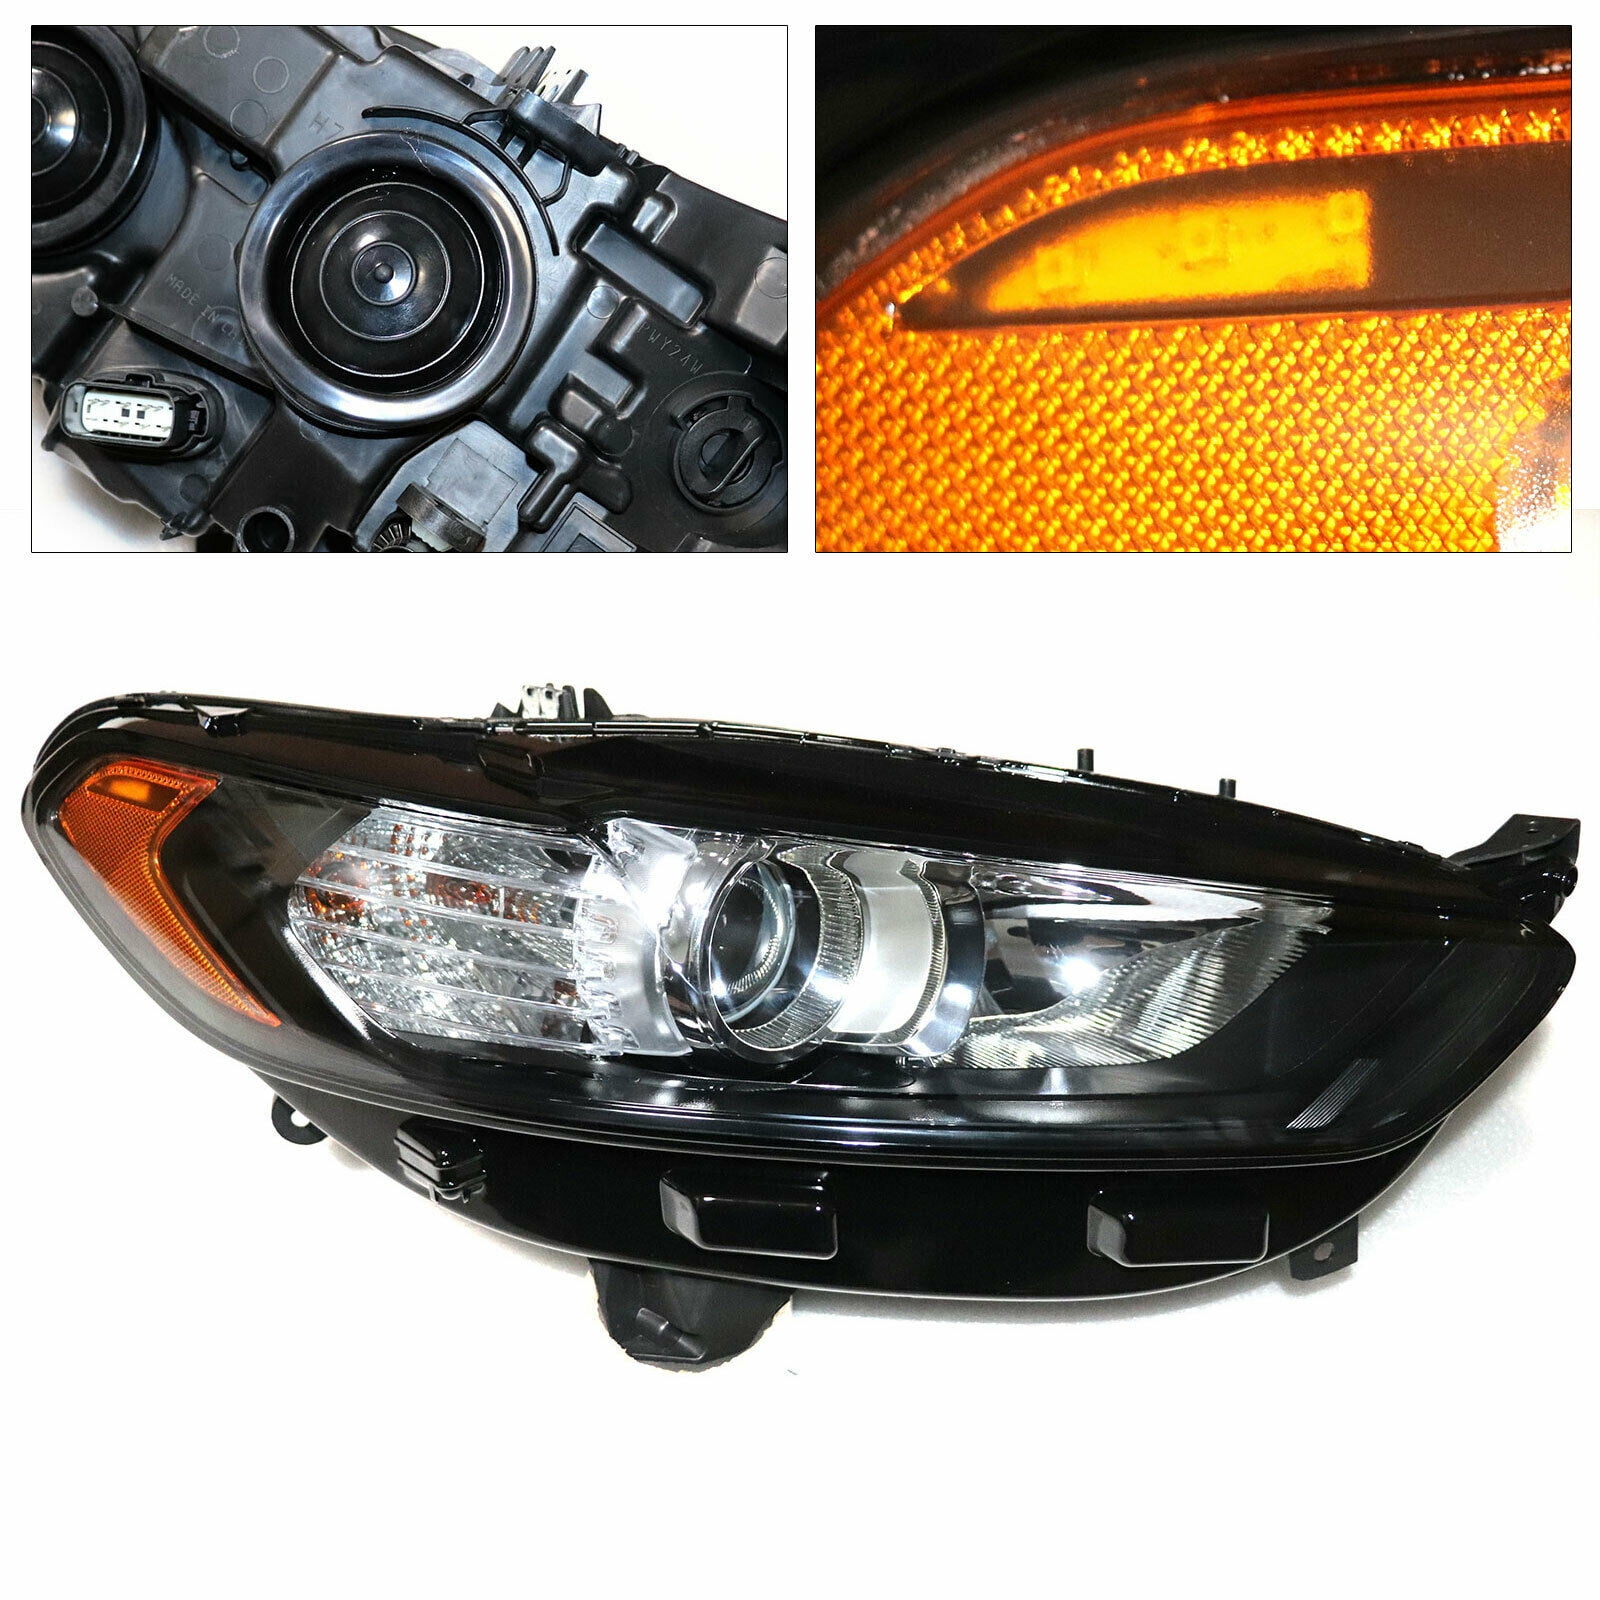 Brighter Design 2p Chrome Headlight Bezel fit for 2007-2009 Ford Fusion 